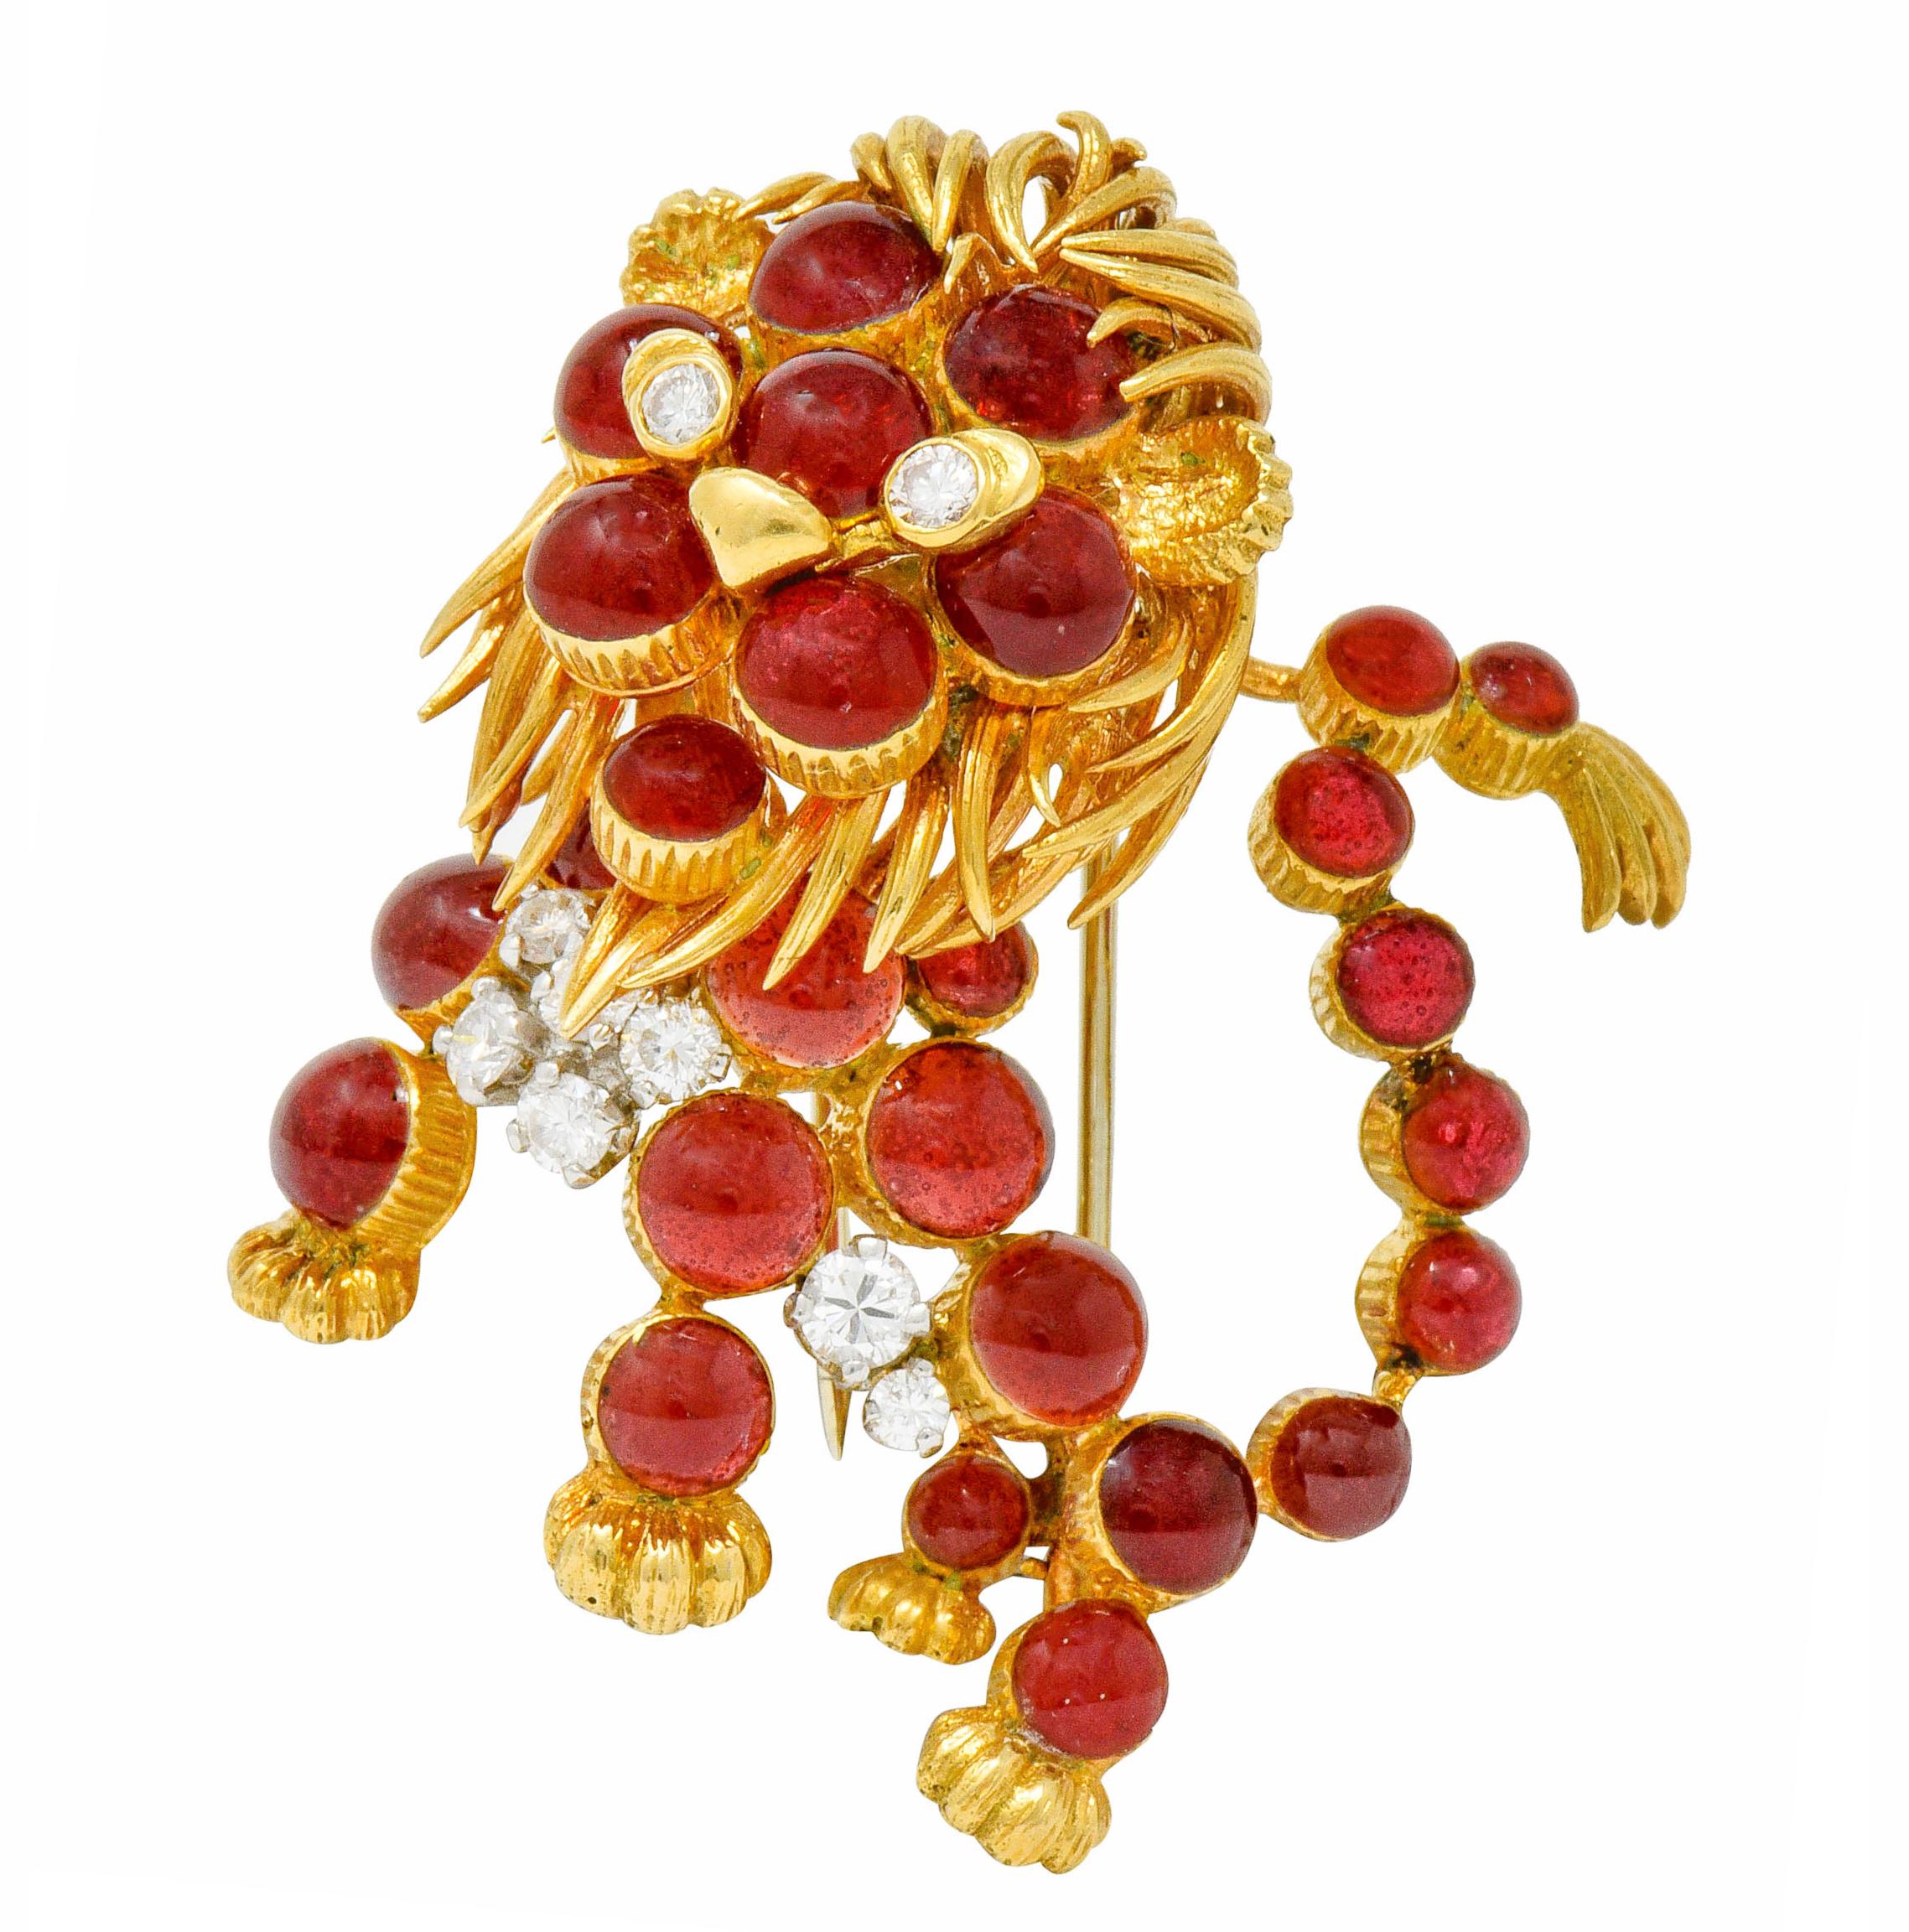 Designed as a whimsical lion with a stylized textured gold mane and other features

Body is comprised of round glass cabochon, bezel set and brick red in color, measuring 4.0 mm to 3.0 mm

With round brilliant diamond accented chest and eyes,